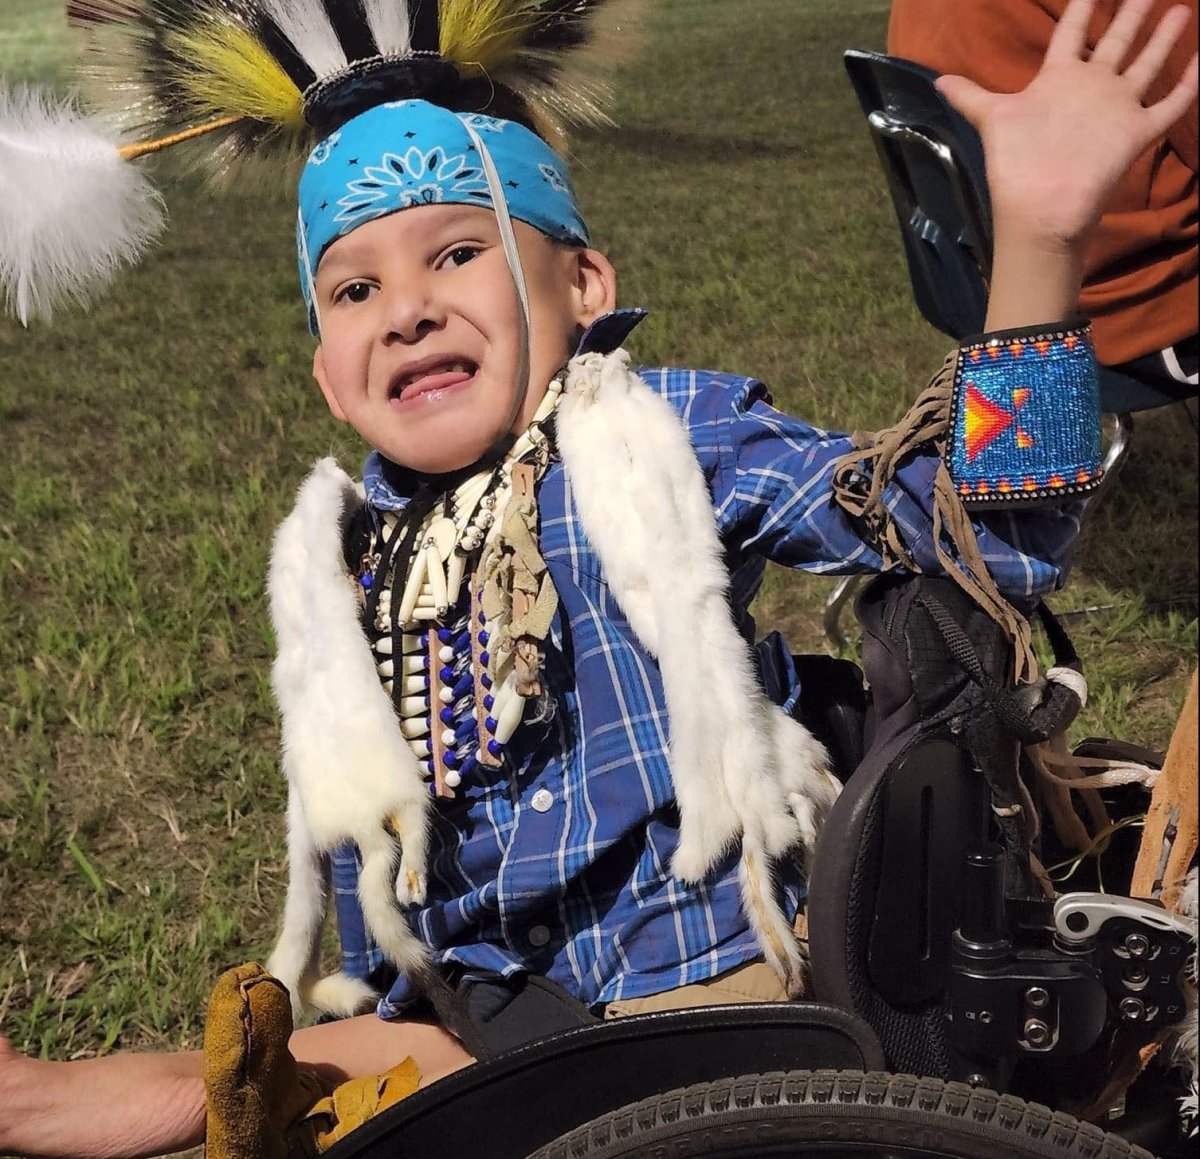 An 8-year-old powwow dancer has touched many hearts at Kahkewistahaw First Nation powwow with his passion for dancing despite having limitations.